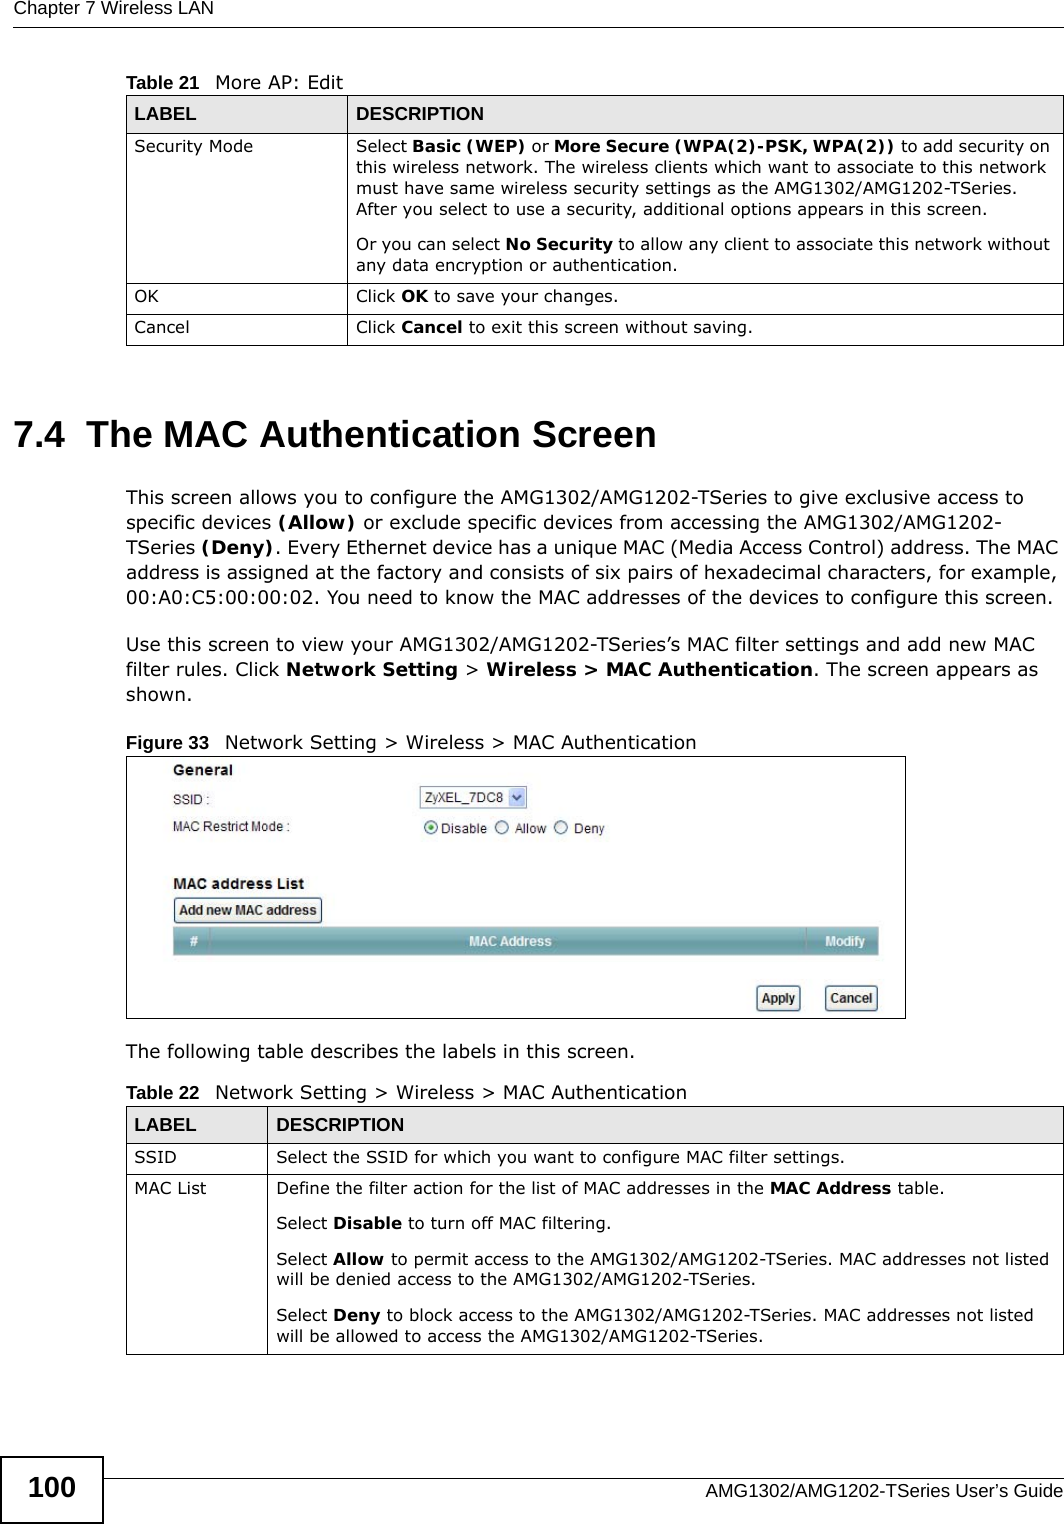 Chapter 7 Wireless LANAMG1302/AMG1202-TSeries User’s Guide1007.4  The MAC Authentication ScreenThis screen allows you to configure the AMG1302/AMG1202-TSeries to give exclusive access to specific devices (Allow) or exclude specific devices from accessing the AMG1302/AMG1202-TSeries (Deny). Every Ethernet device has a unique MAC (Media Access Control) address. The MAC address is assigned at the factory and consists of six pairs of hexadecimal characters, for example, 00:A0:C5:00:00:02. You need to know the MAC addresses of the devices to configure this screen.Use this screen to view your AMG1302/AMG1202-TSeries’s MAC filter settings and add new MAC filter rules. Click Network Setting &gt; Wireless &gt; MAC Authentication. The screen appears as shown.Figure 33   Network Setting &gt; Wireless &gt; MAC AuthenticationThe following table describes the labels in this screen.Security Mode Select Basic (WEP) or More Secure (WPA(2)-PSK, WPA(2)) to add security on this wireless network. The wireless clients which want to associate to this network must have same wireless security settings as the AMG1302/AMG1202-TSeries. After you select to use a security, additional options appears in this screen. Or you can select No Security to allow any client to associate this network without any data encryption or authentication.OK Click OK to save your changes.Cancel Click Cancel to exit this screen without saving.Table 21   More AP: EditLABEL DESCRIPTIONTable 22   Network Setting &gt; Wireless &gt; MAC AuthenticationLABEL DESCRIPTIONSSID Select the SSID for which you want to configure MAC filter settings.MAC List Define the filter action for the list of MAC addresses in the MAC Address table. Select Disable to turn off MAC filtering.Select Allow to permit access to the AMG1302/AMG1202-TSeries. MAC addresses not listed will be denied access to the AMG1302/AMG1202-TSeries. Select Deny to block access to the AMG1302/AMG1202-TSeries. MAC addresses not listed will be allowed to access the AMG1302/AMG1202-TSeries. 